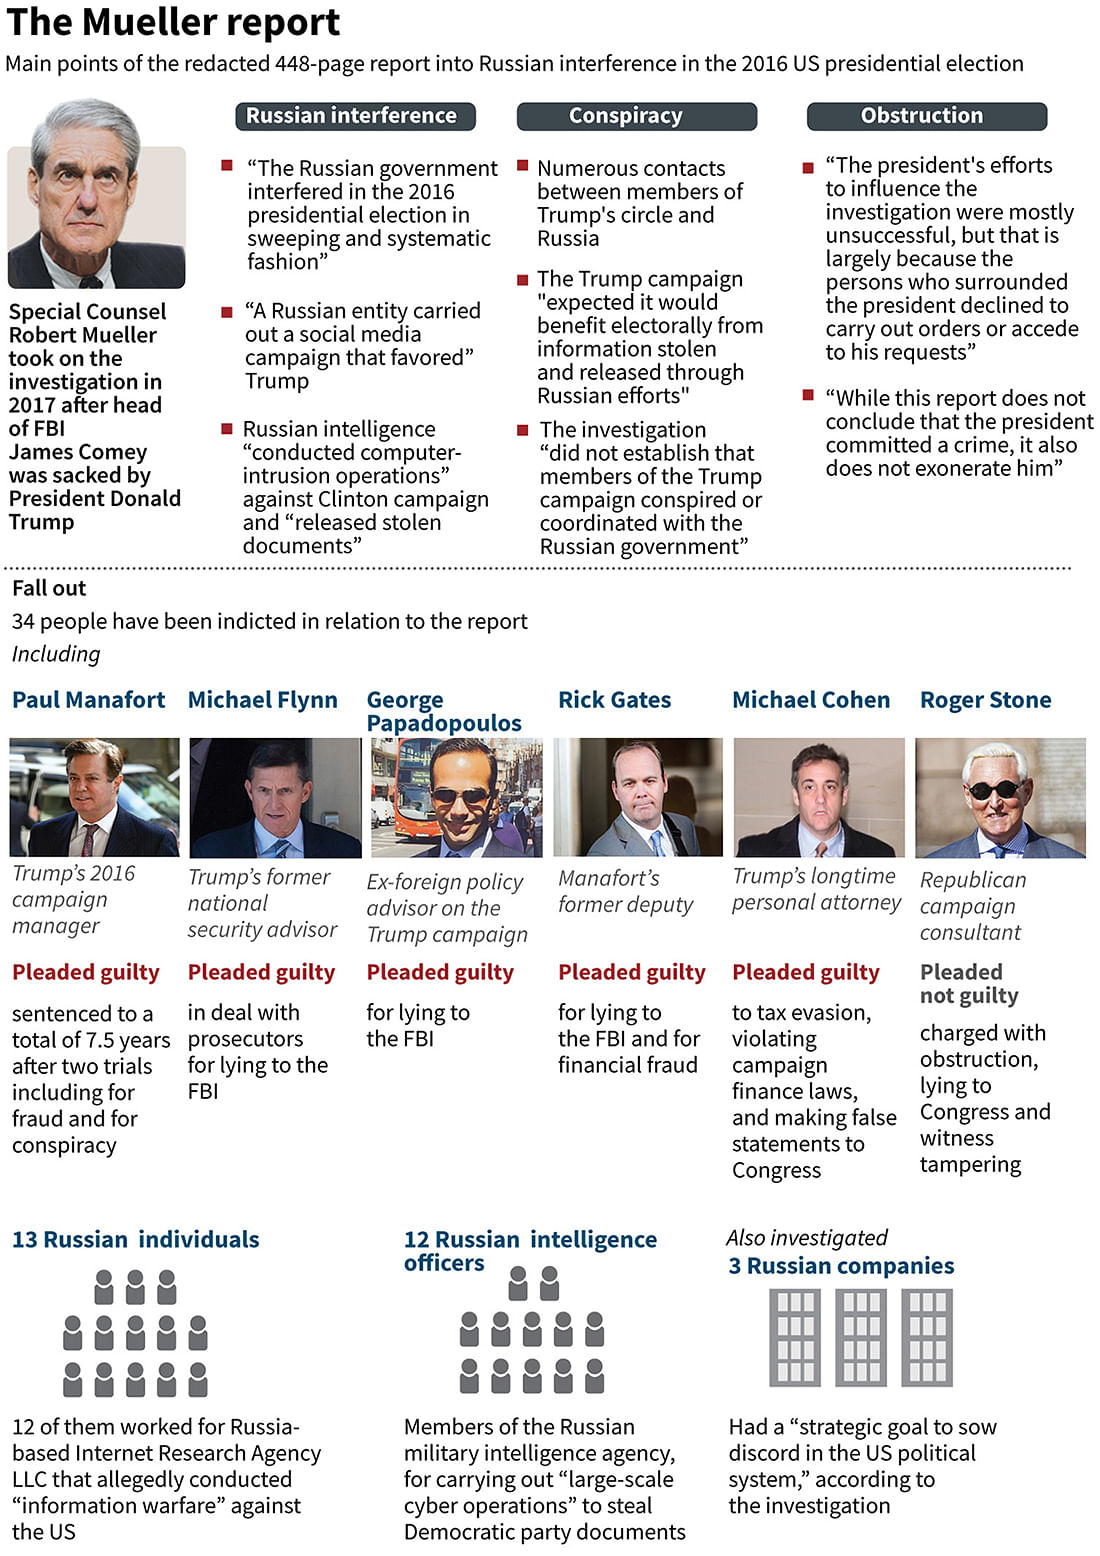 Main points from the redacted 448-page report by US Special Counsel Robert Mueller. Photo: AFP